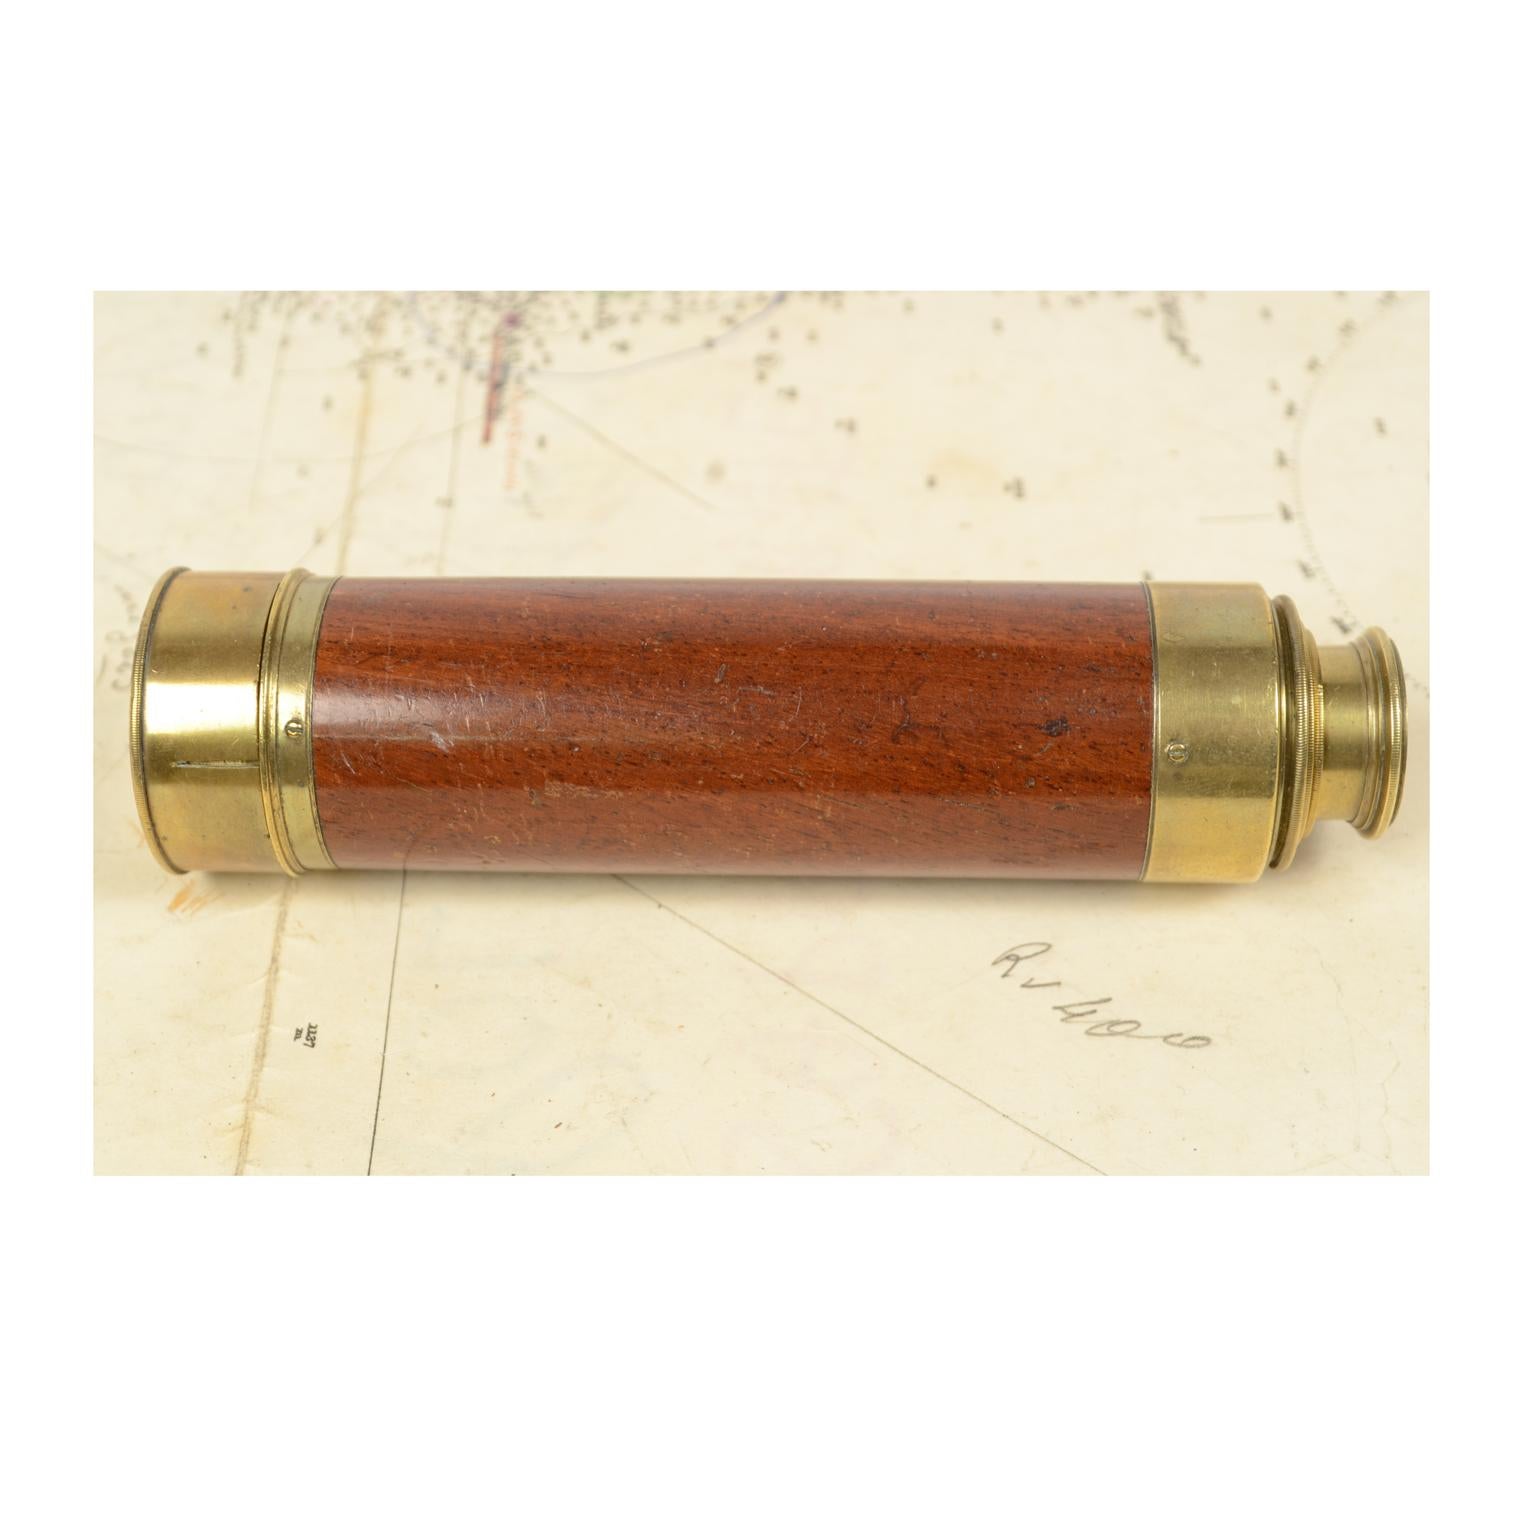 Mid-19th Century Brass Telescope with Mahogany Wooden Handle Made in UK in circa 1840